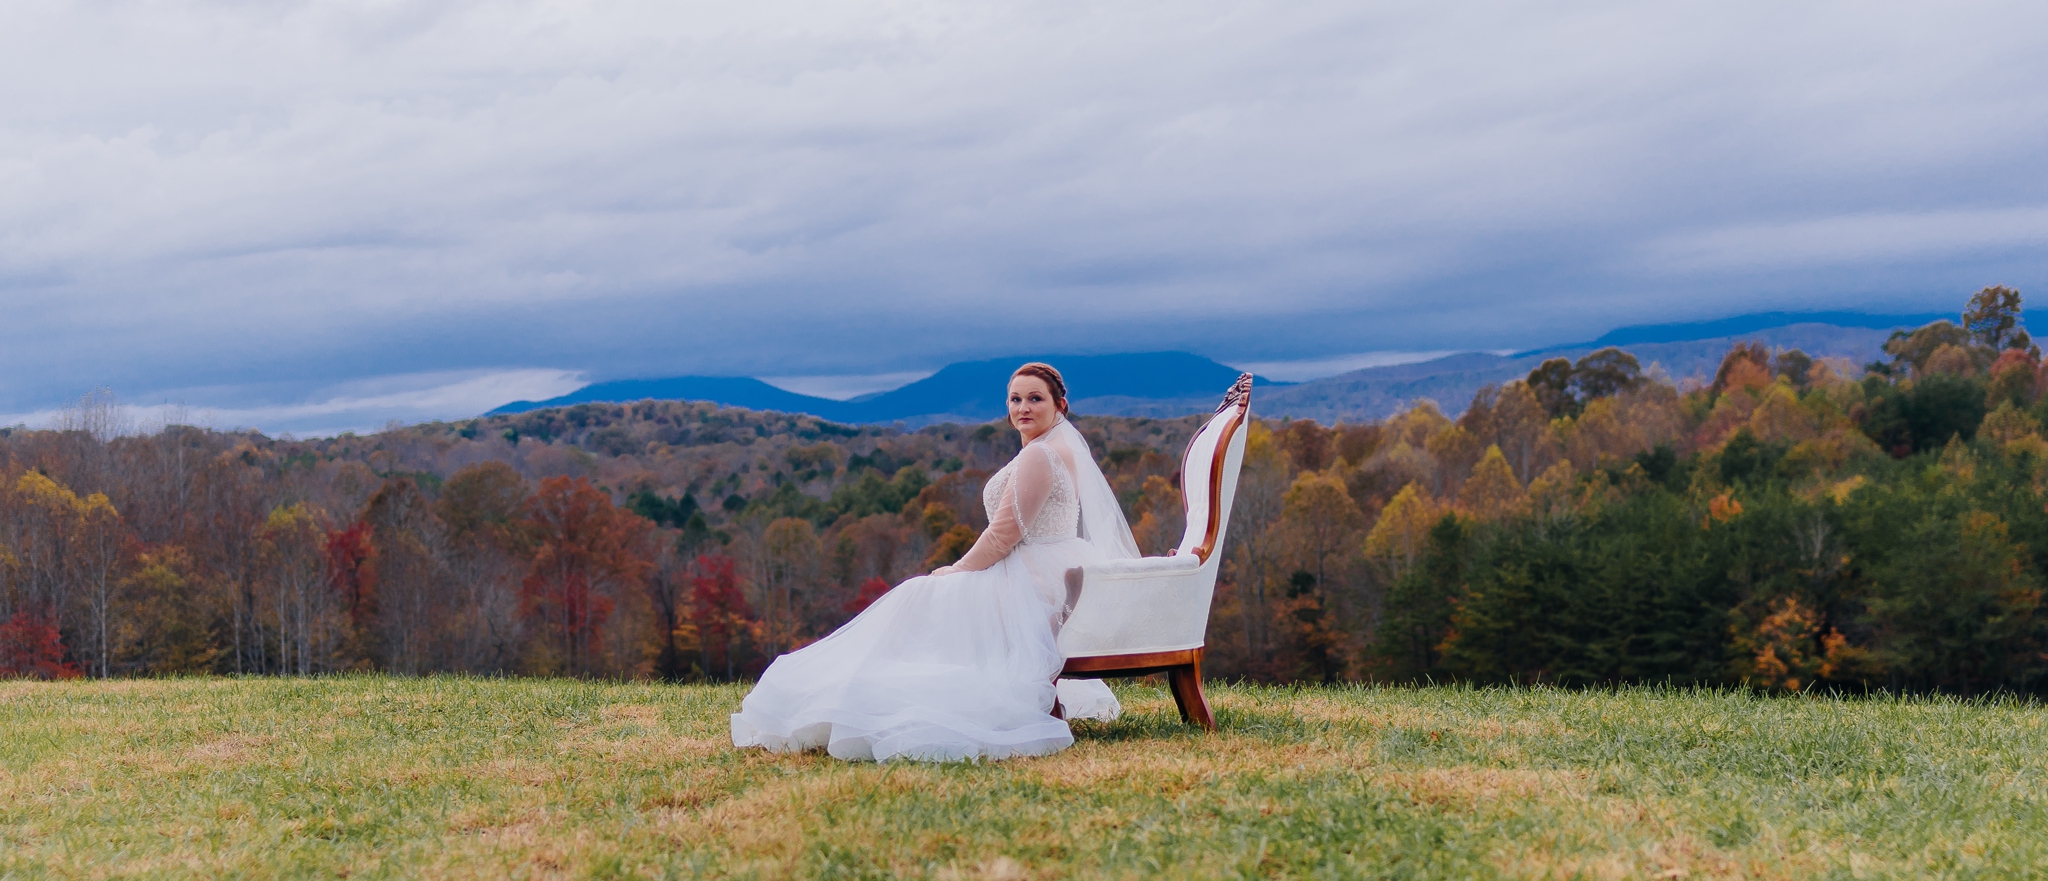 Bride_in_wedding_dress_on_mountaintop_at_glass_hill_venue_Ynchburg_virginia_overlooking_blue_ridge_mountain_by_jonathan_and_hannah_photography